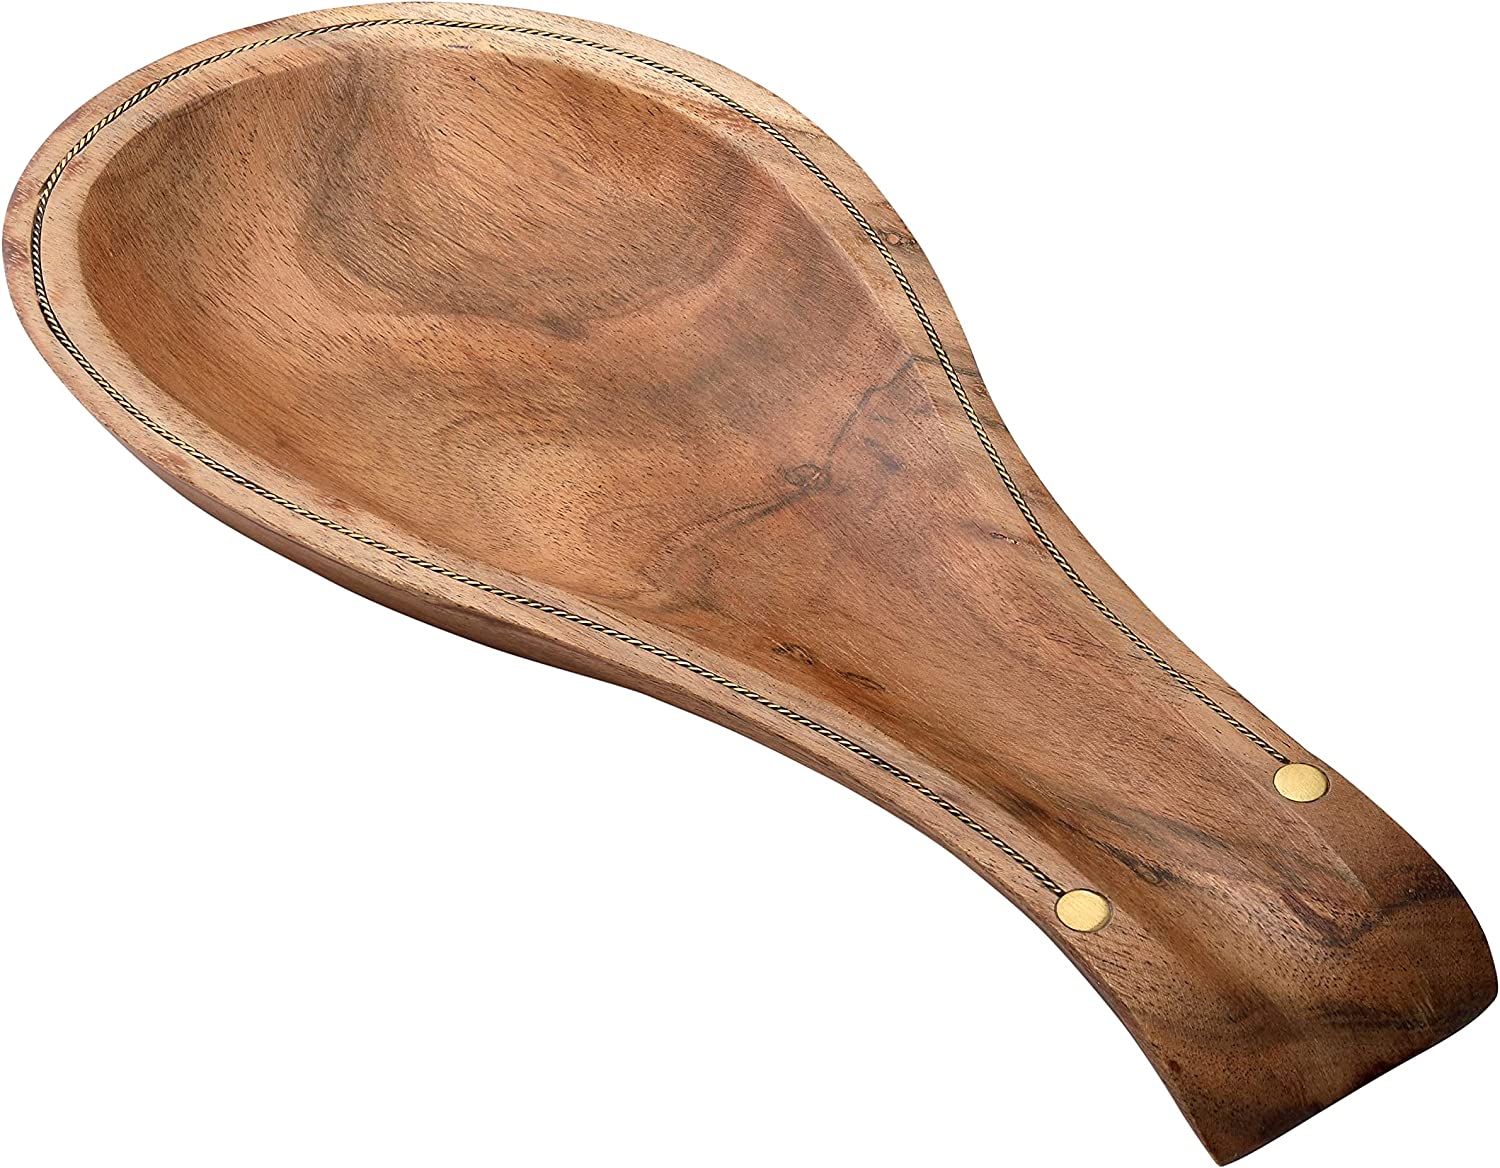 Folkulture Spoon Rest for Kitchen Counter, Spoon [...]